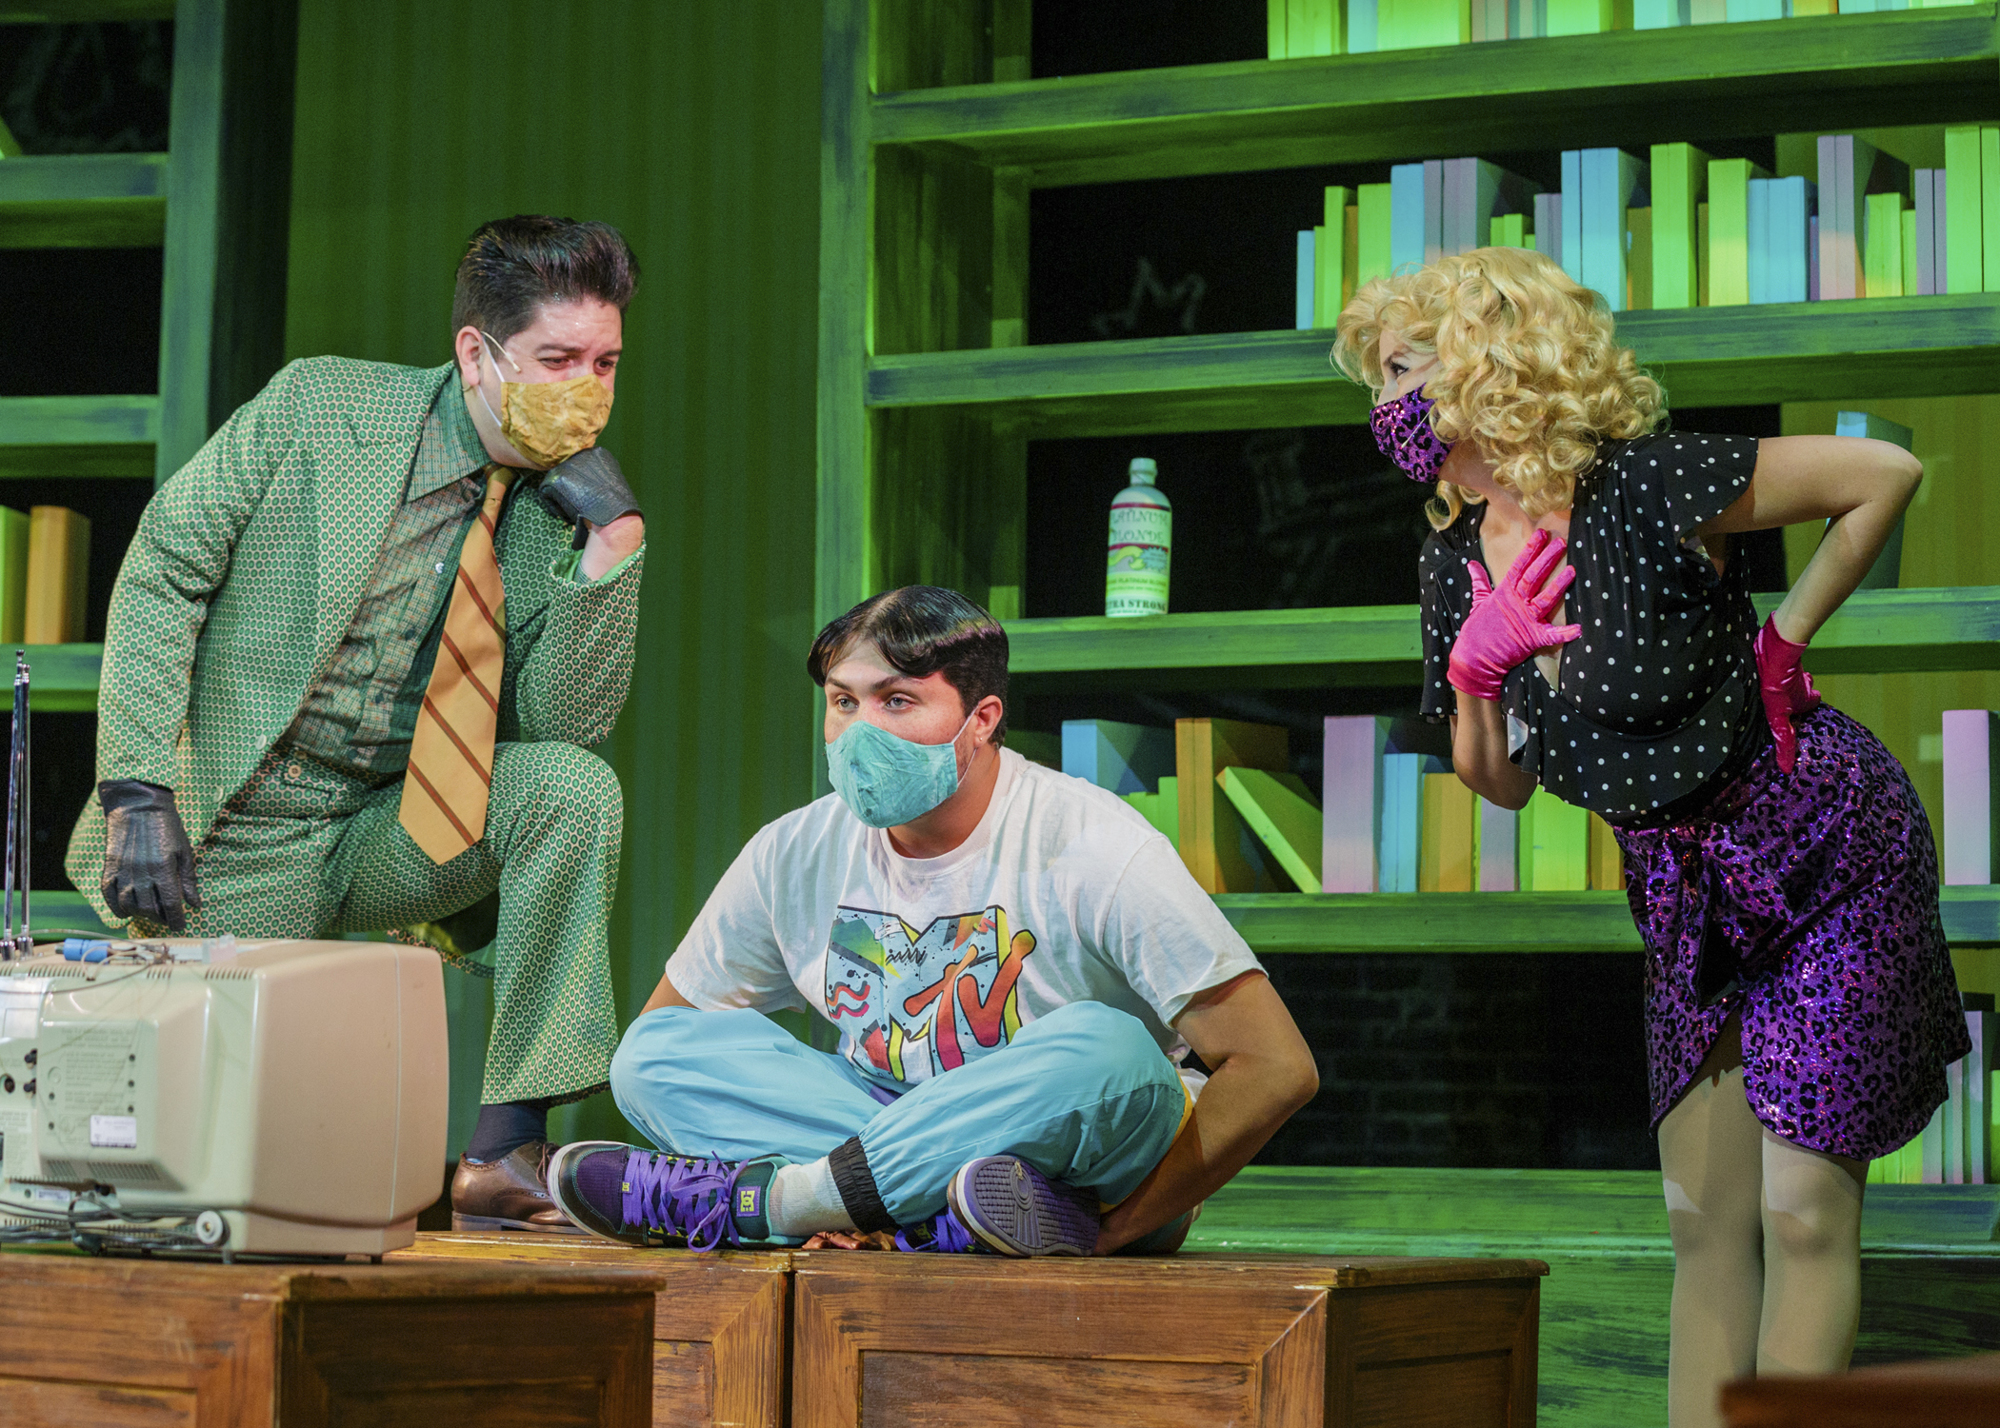 Mr. and Mrs. Wormwood — played by Daniel Abels Rodriguez and Hannah McGinley Lemasters — talk to their son, Michael, played by Yan Diaz. (Courtesy Steven Miller Photography)